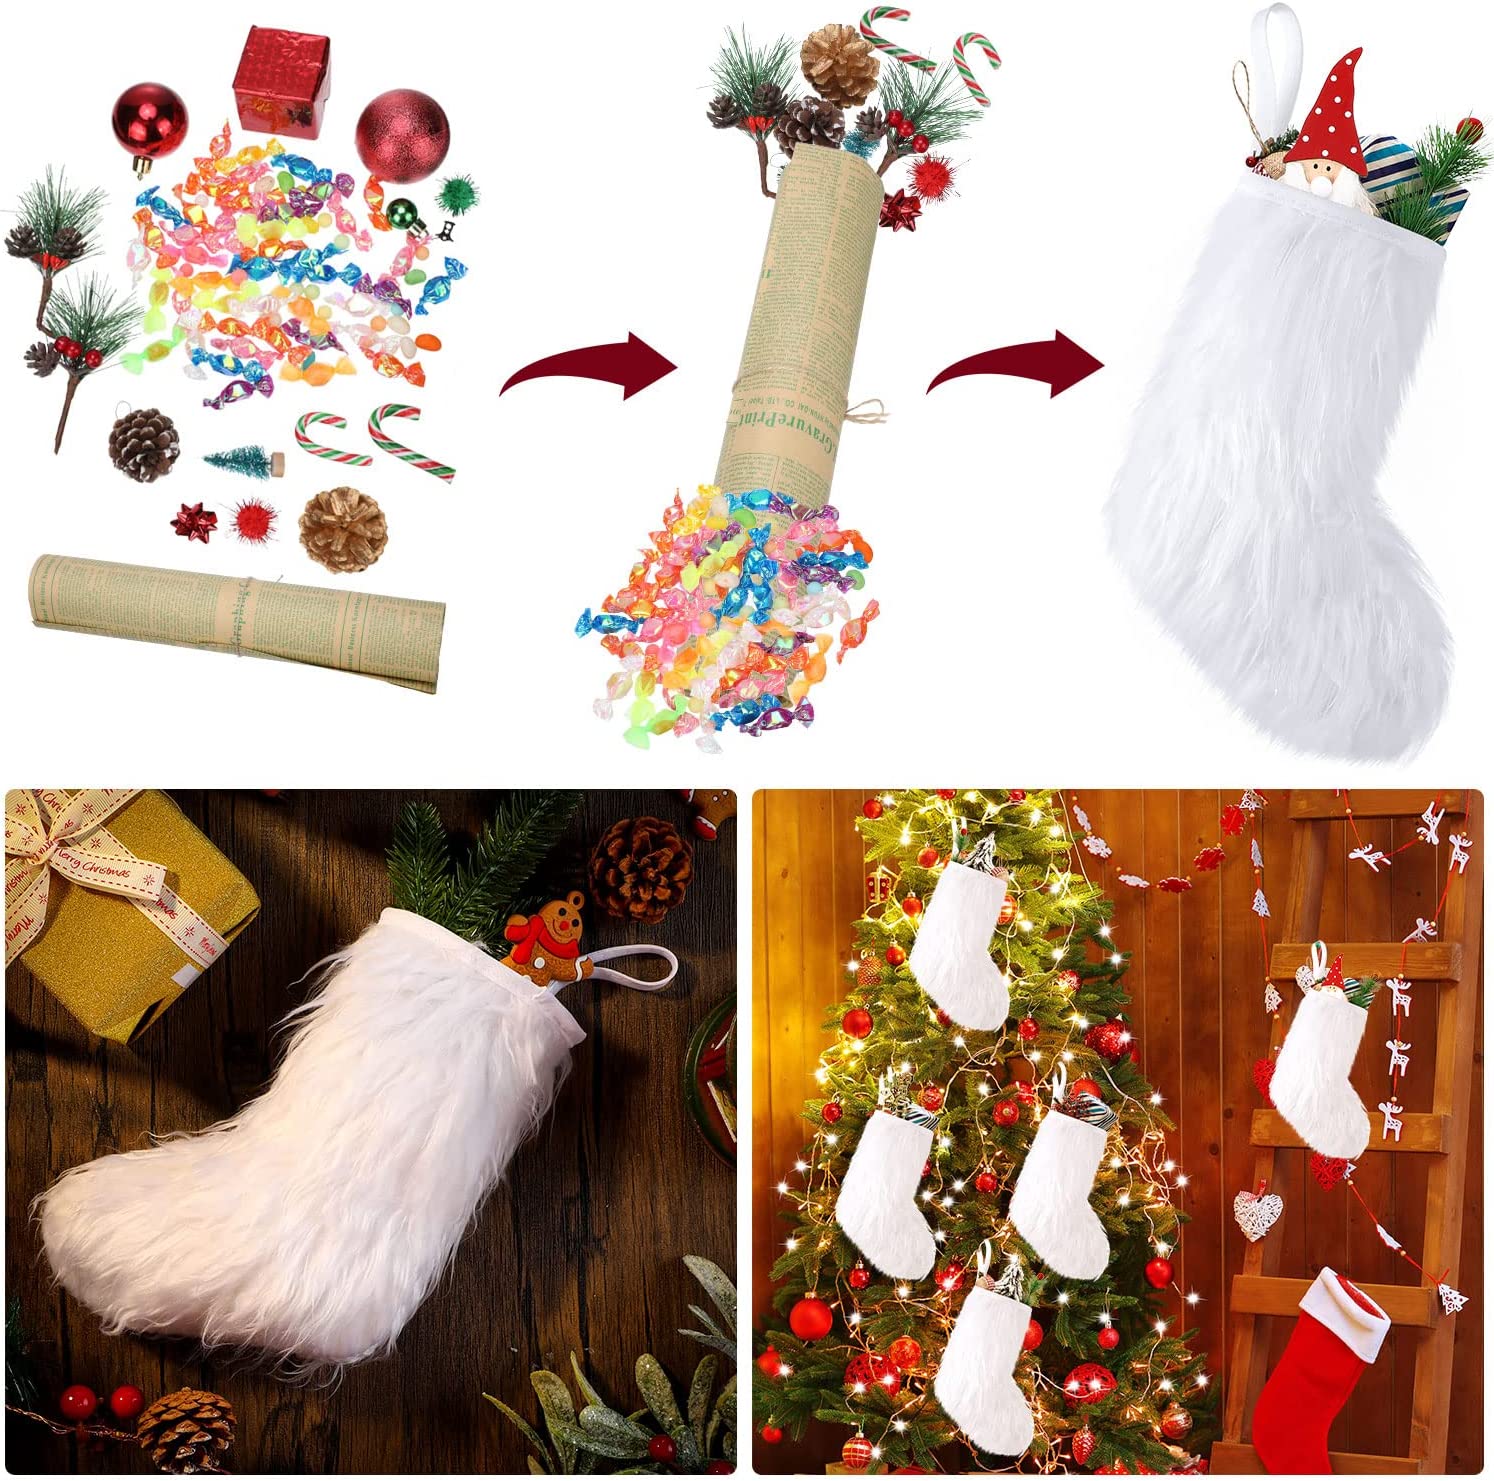 12 Pcs 10 Inch Snowy White Christmas Stockings Faux Fur Christmas Stockings Furry Christmas Stocking Hanging Ornaments Candy Gift Bags Fireplace Hanging Stocking for Decorations Xmas Tree